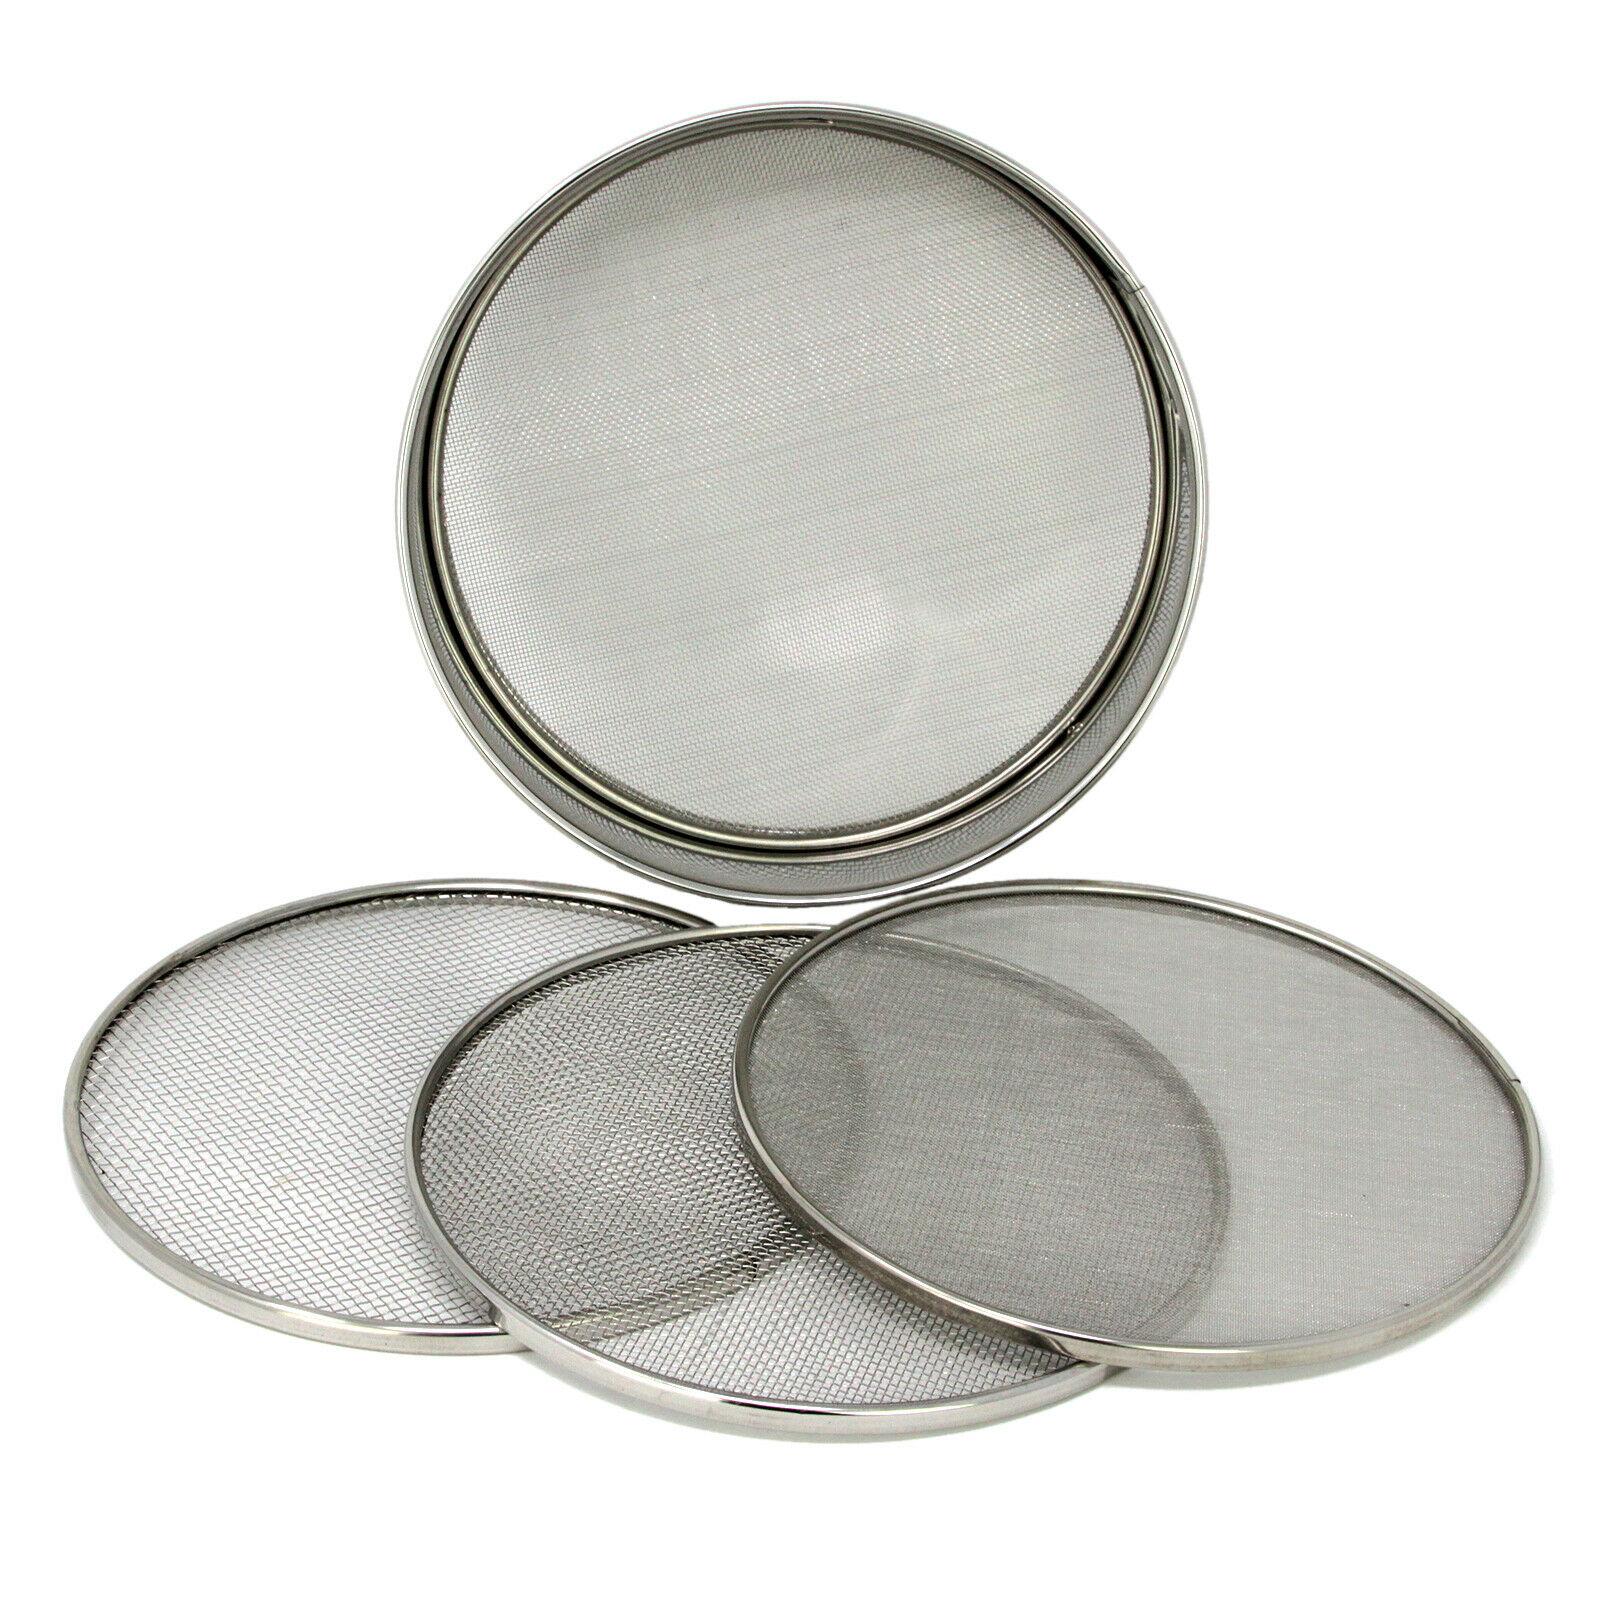 Edco Stainless Steel Strainer Mesh Sieve with Silicone Handle Coloured Grey, 13.5cm 13.5cm or 20cm 